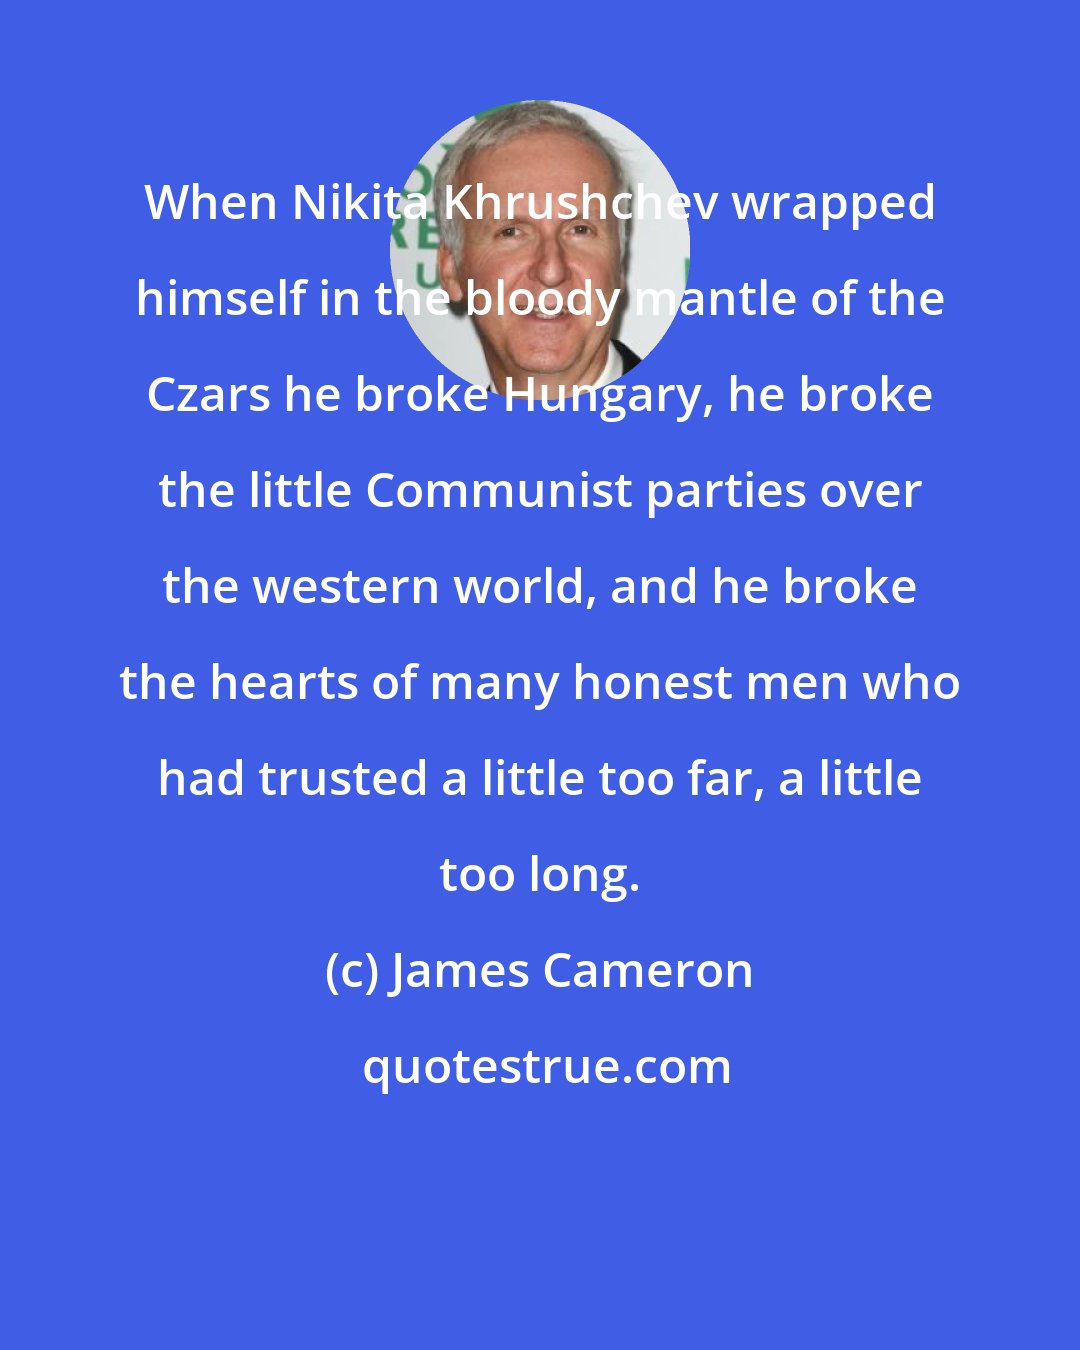 James Cameron: When Nikita Khrushchev wrapped himself in the bloody mantle of the Czars he broke Hungary, he broke the little Communist parties over the western world, and he broke the hearts of many honest men who had trusted a little too far, a little too long.